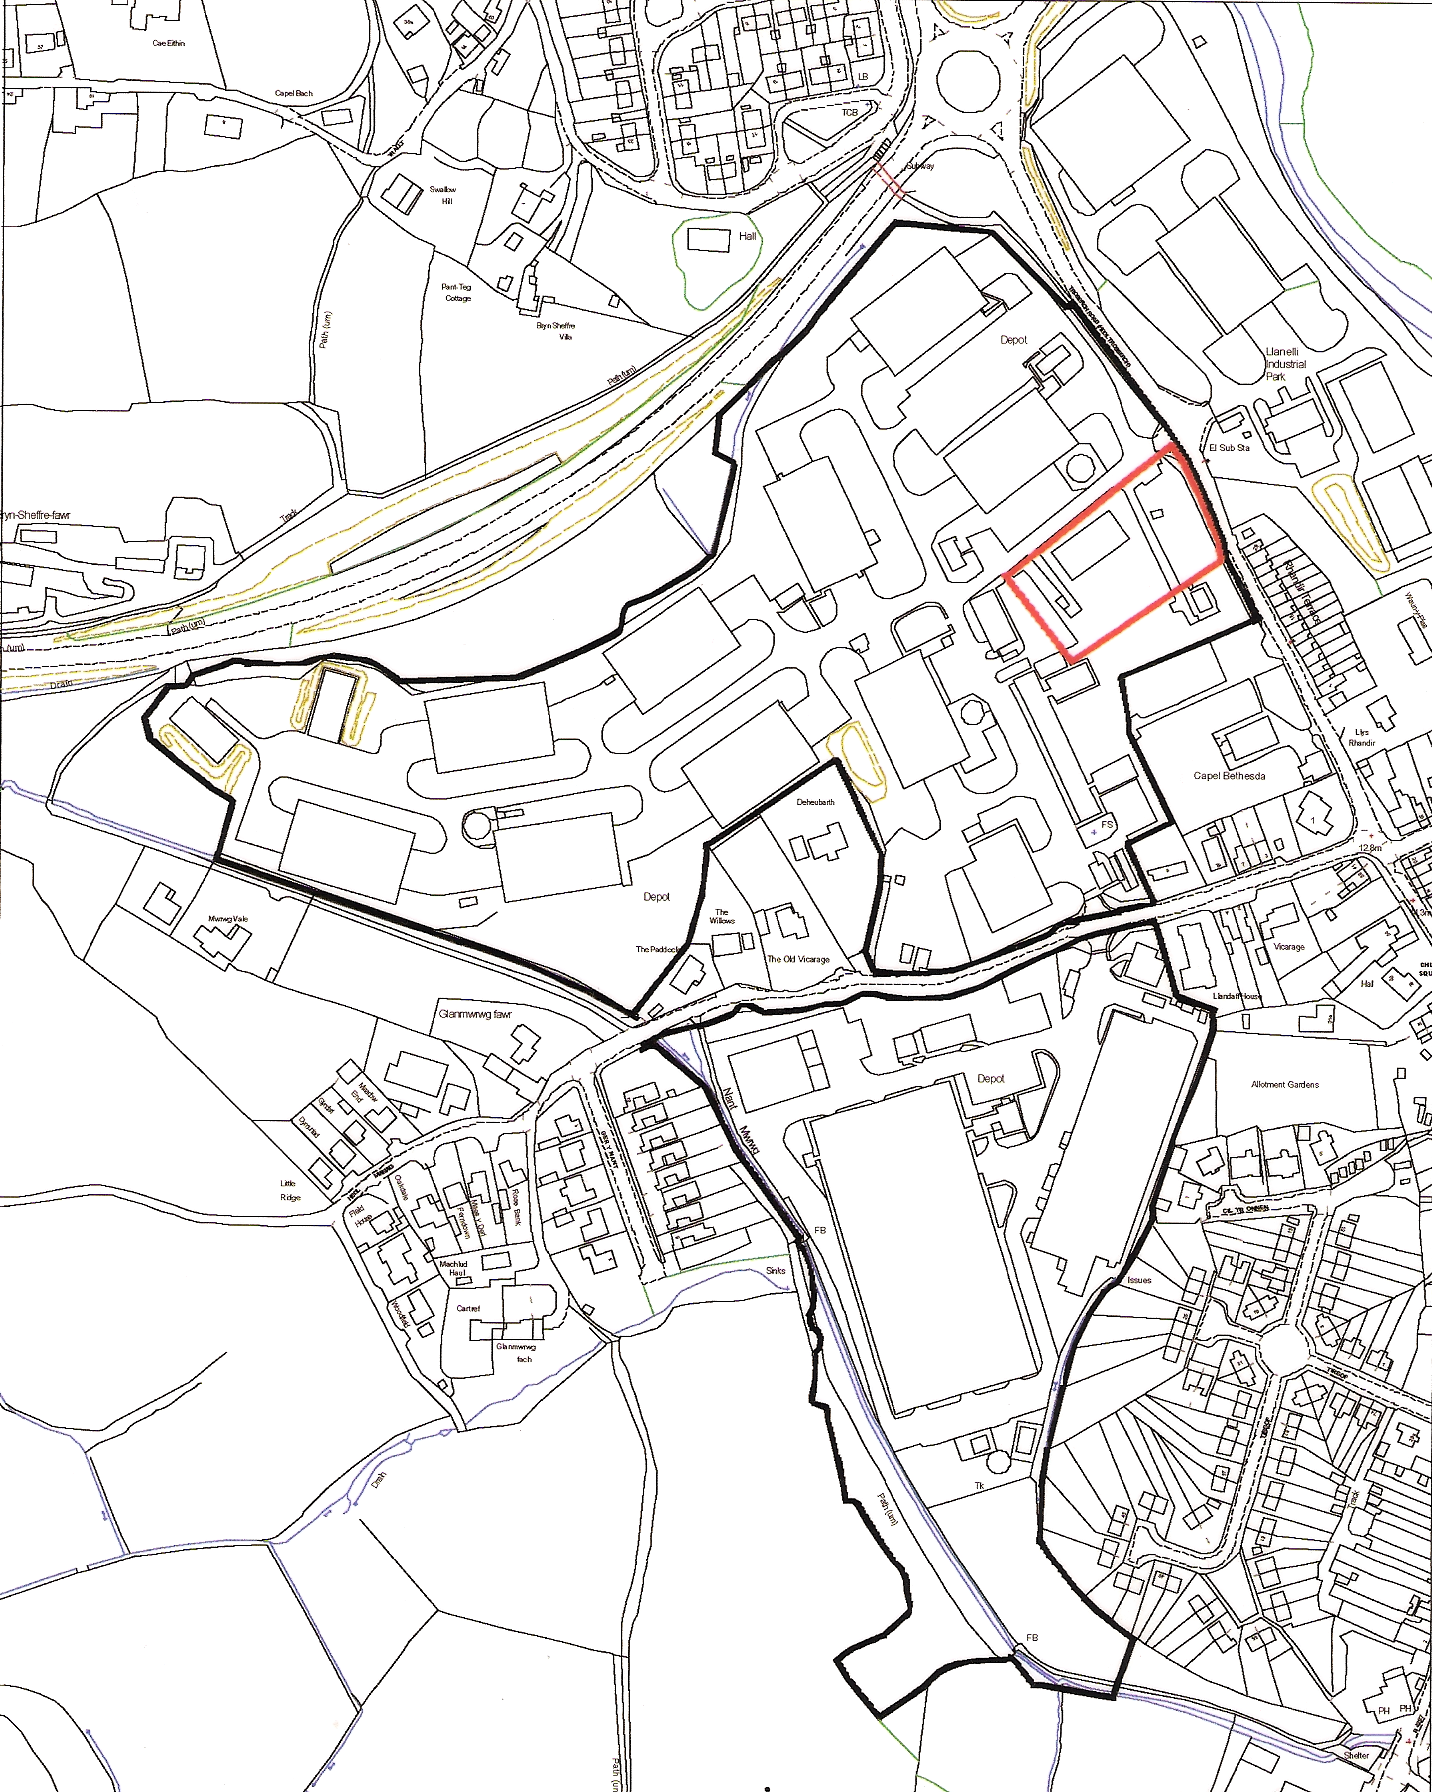 Ordnance Survey map showing the location of the new pitch.